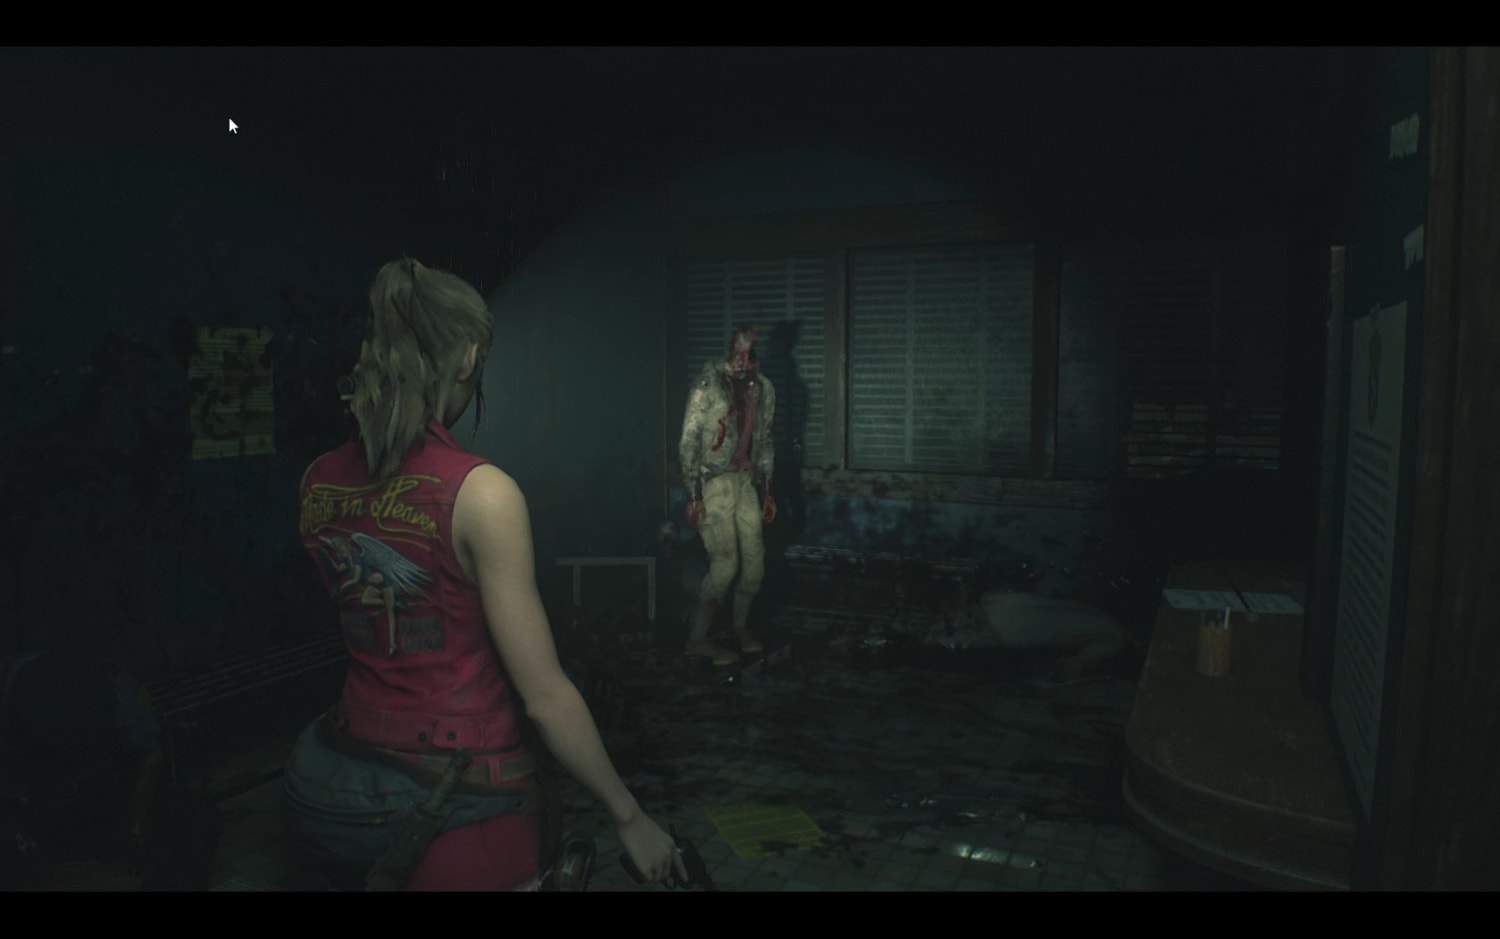 [Resident Evil 2] Three in a row! Claire encounters a phantom zombie, an unhelpful door, and Monty Python's Black Knight